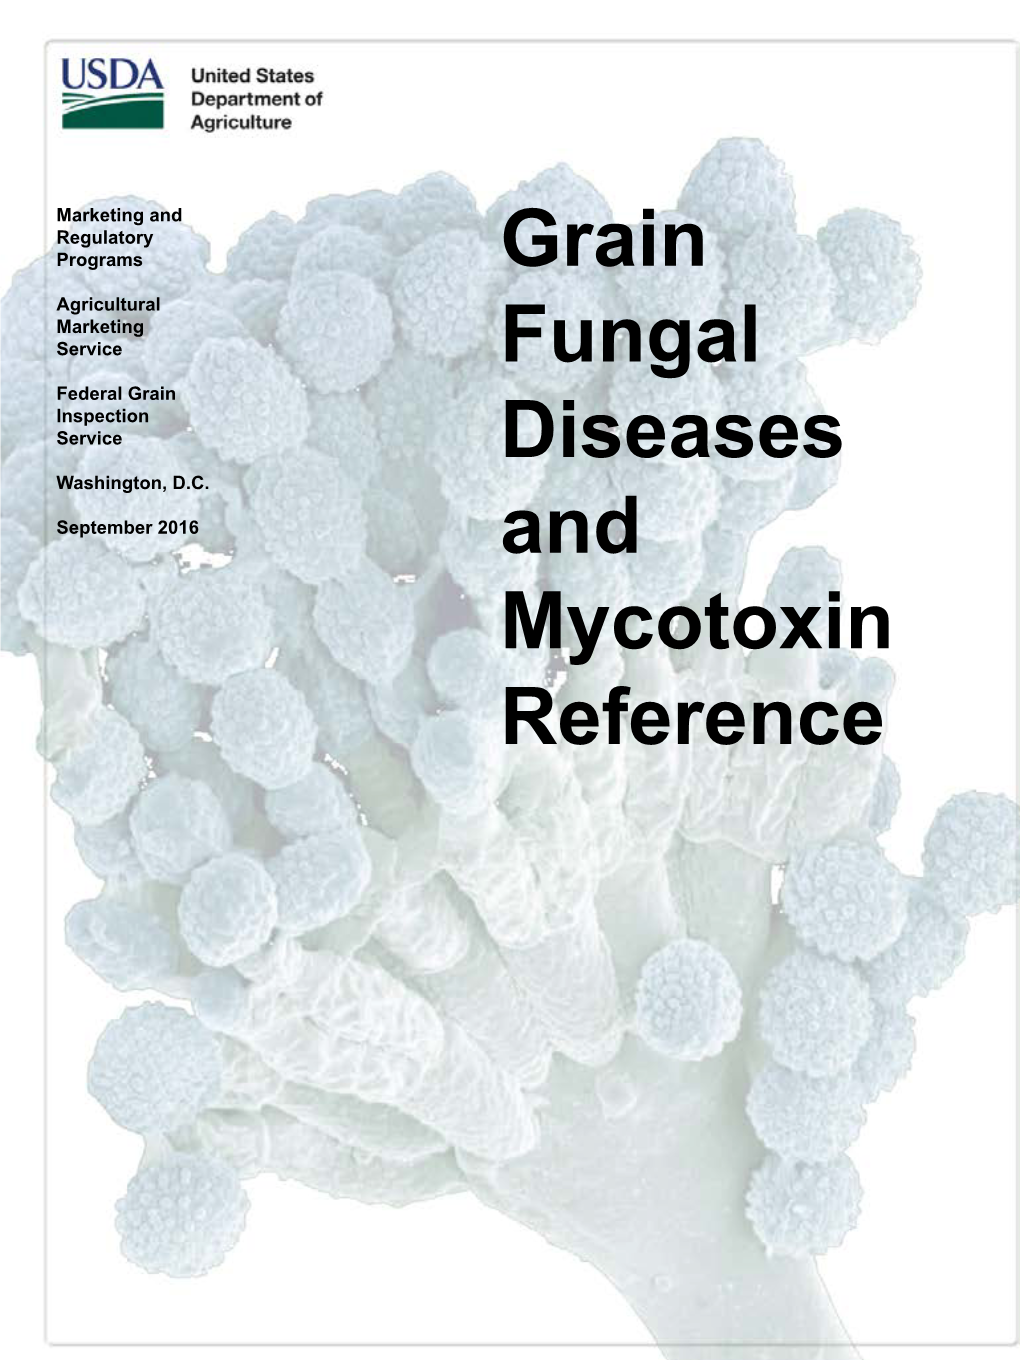 Grain Fungal Diseases and Mycotoxin Reference